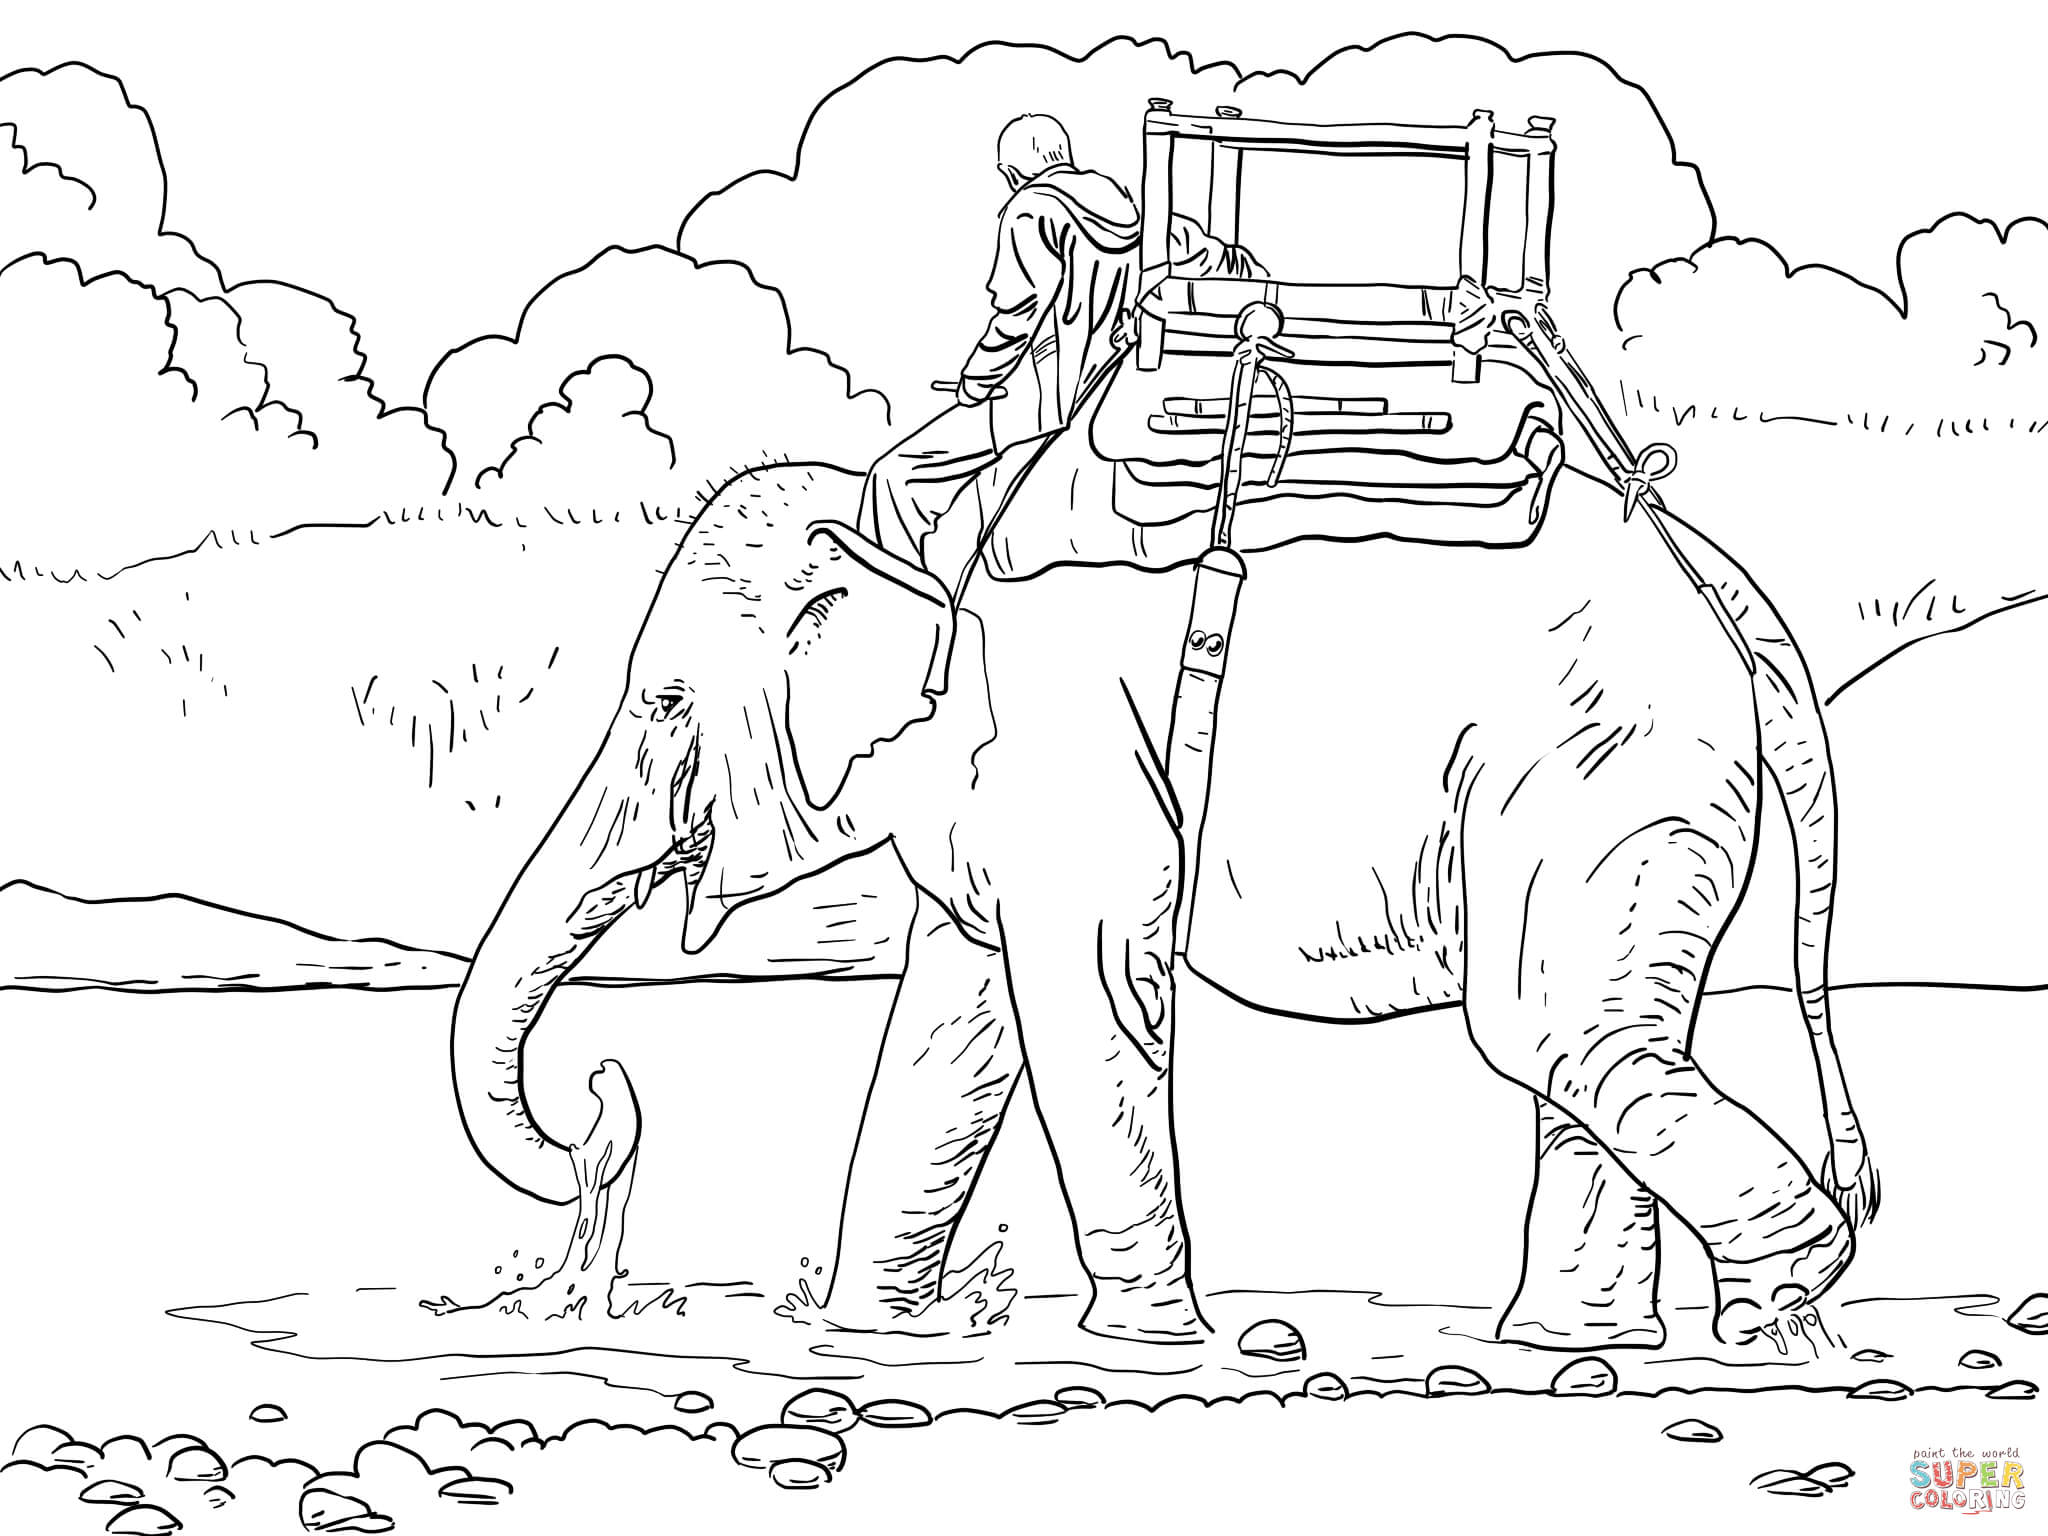 Cute Indian Elephant coloring page | Free Printable Coloring Pages